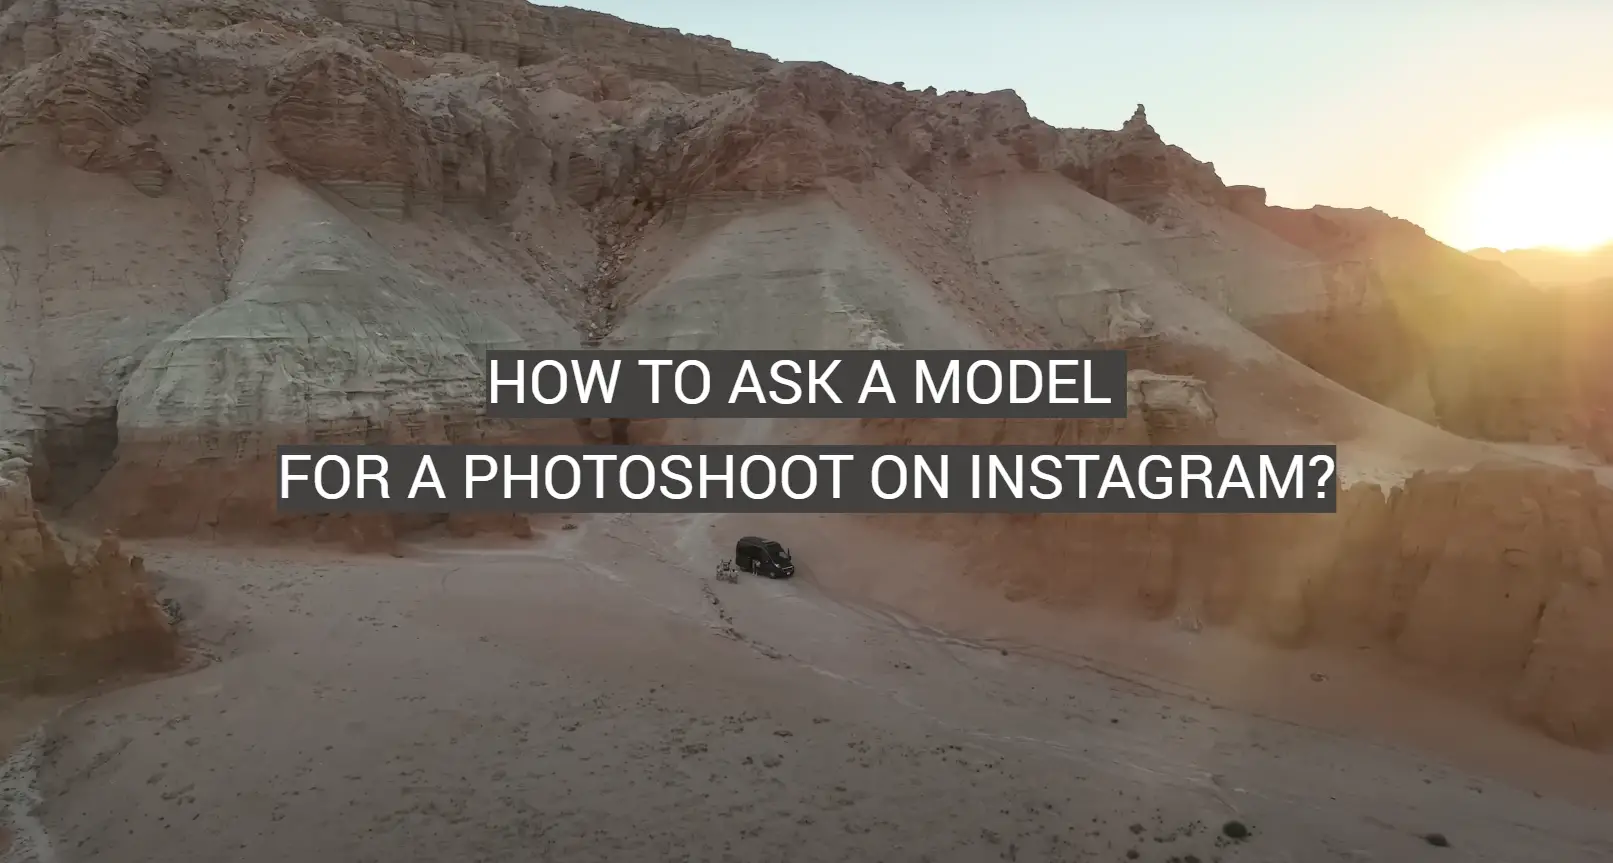 How to Ask a Model for a Photoshoot on Instagram?